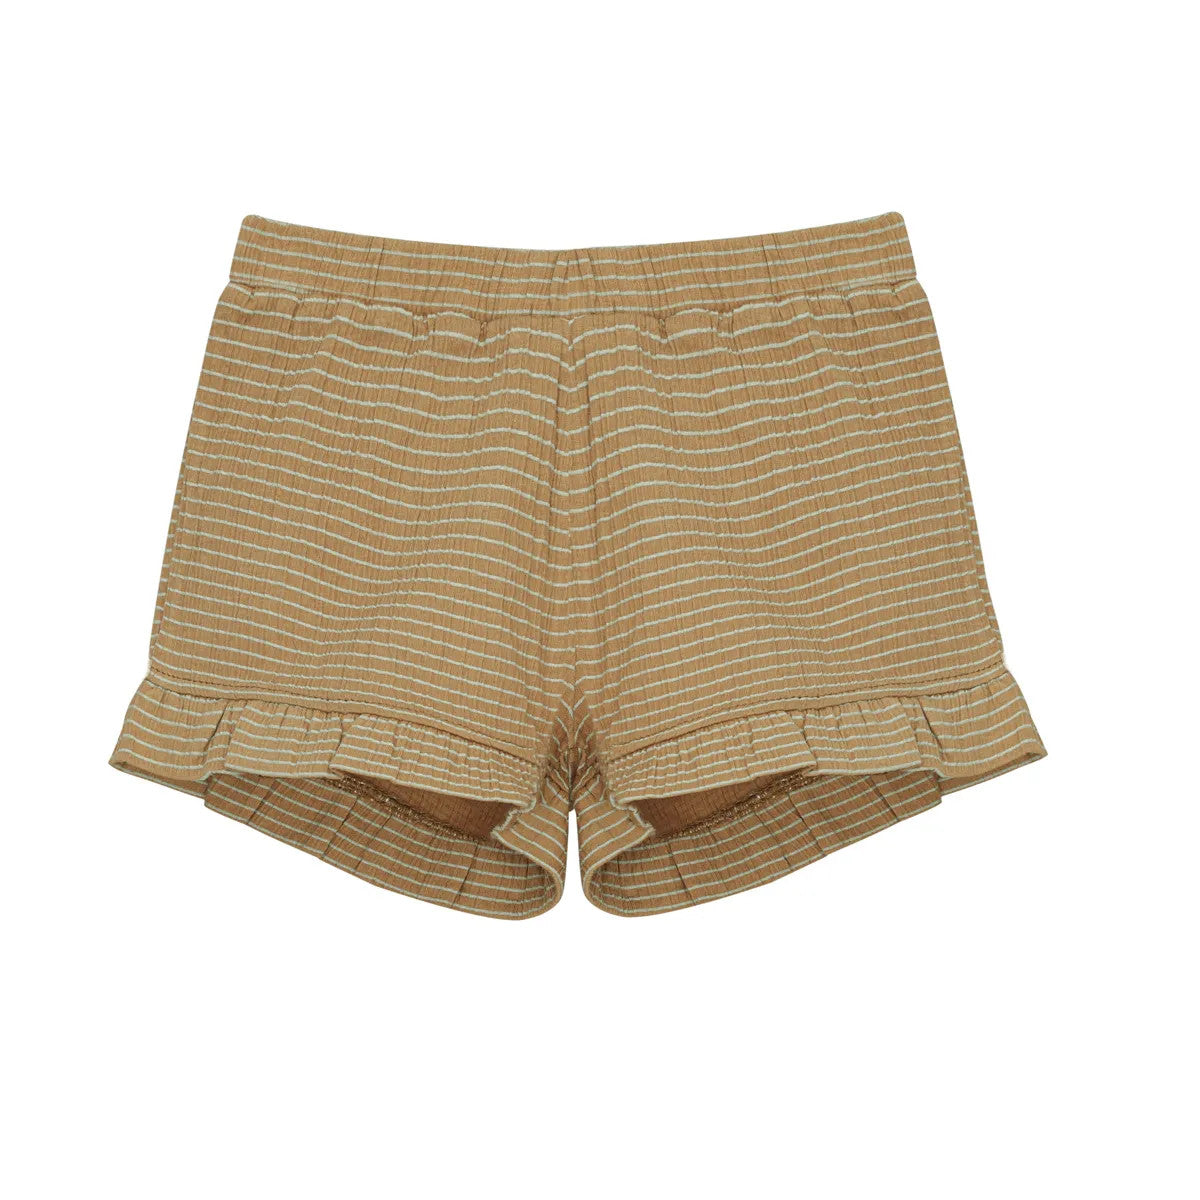 Little Hedonist ruffled short in Amber Gold almond for girls. Made from organic soft muslin. Sustainable kids clothing.